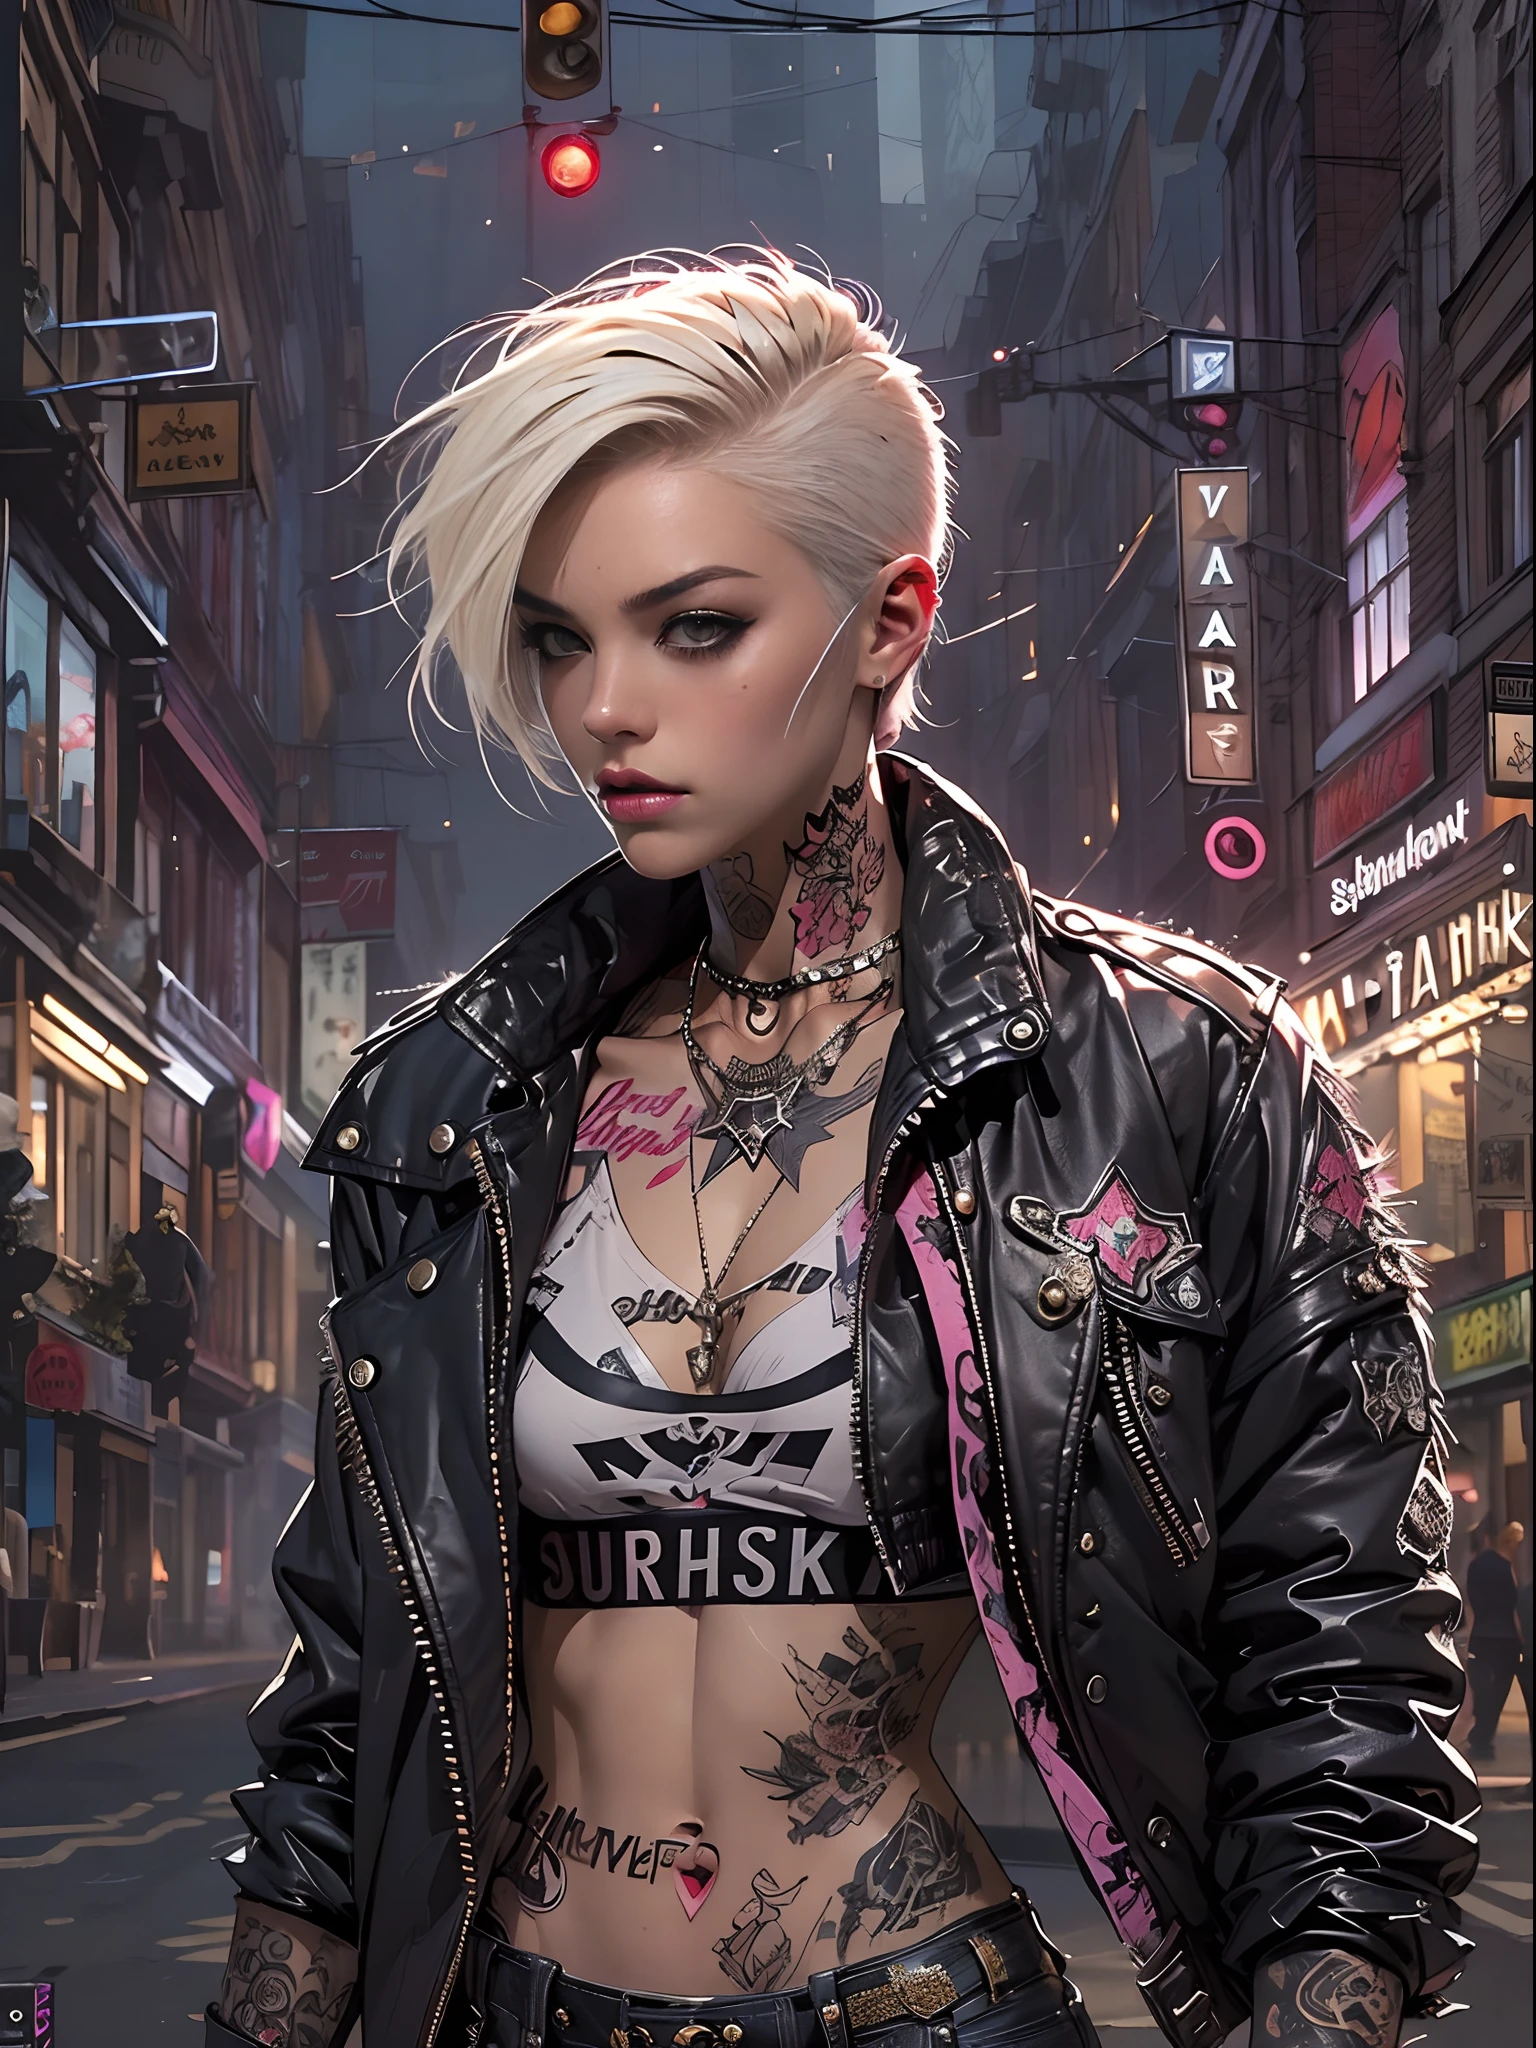 (((of the highest quality: 1.4))),(unparalleled masterpiece ever), (Ultra high definition),(Ultra-realistic 8K CG), offcial art、 (((adult body))), (((1girl in))), ((( Bob Shorthair ))), Punk girl with a perfect body, Jacket with metal spines,Beautiful and well-groomed face,,Detailed punk fashion,leather jackets, (Image from head to thigh),(( White Blonde Bob Shorthair )), Small leather panties, Simon Bisley's urban savage style,Detailed street background of London,Clean abs, Complex graphics, dark pink with white stars and gray and white stripes,, (( Many poisonous tattoos )), ,